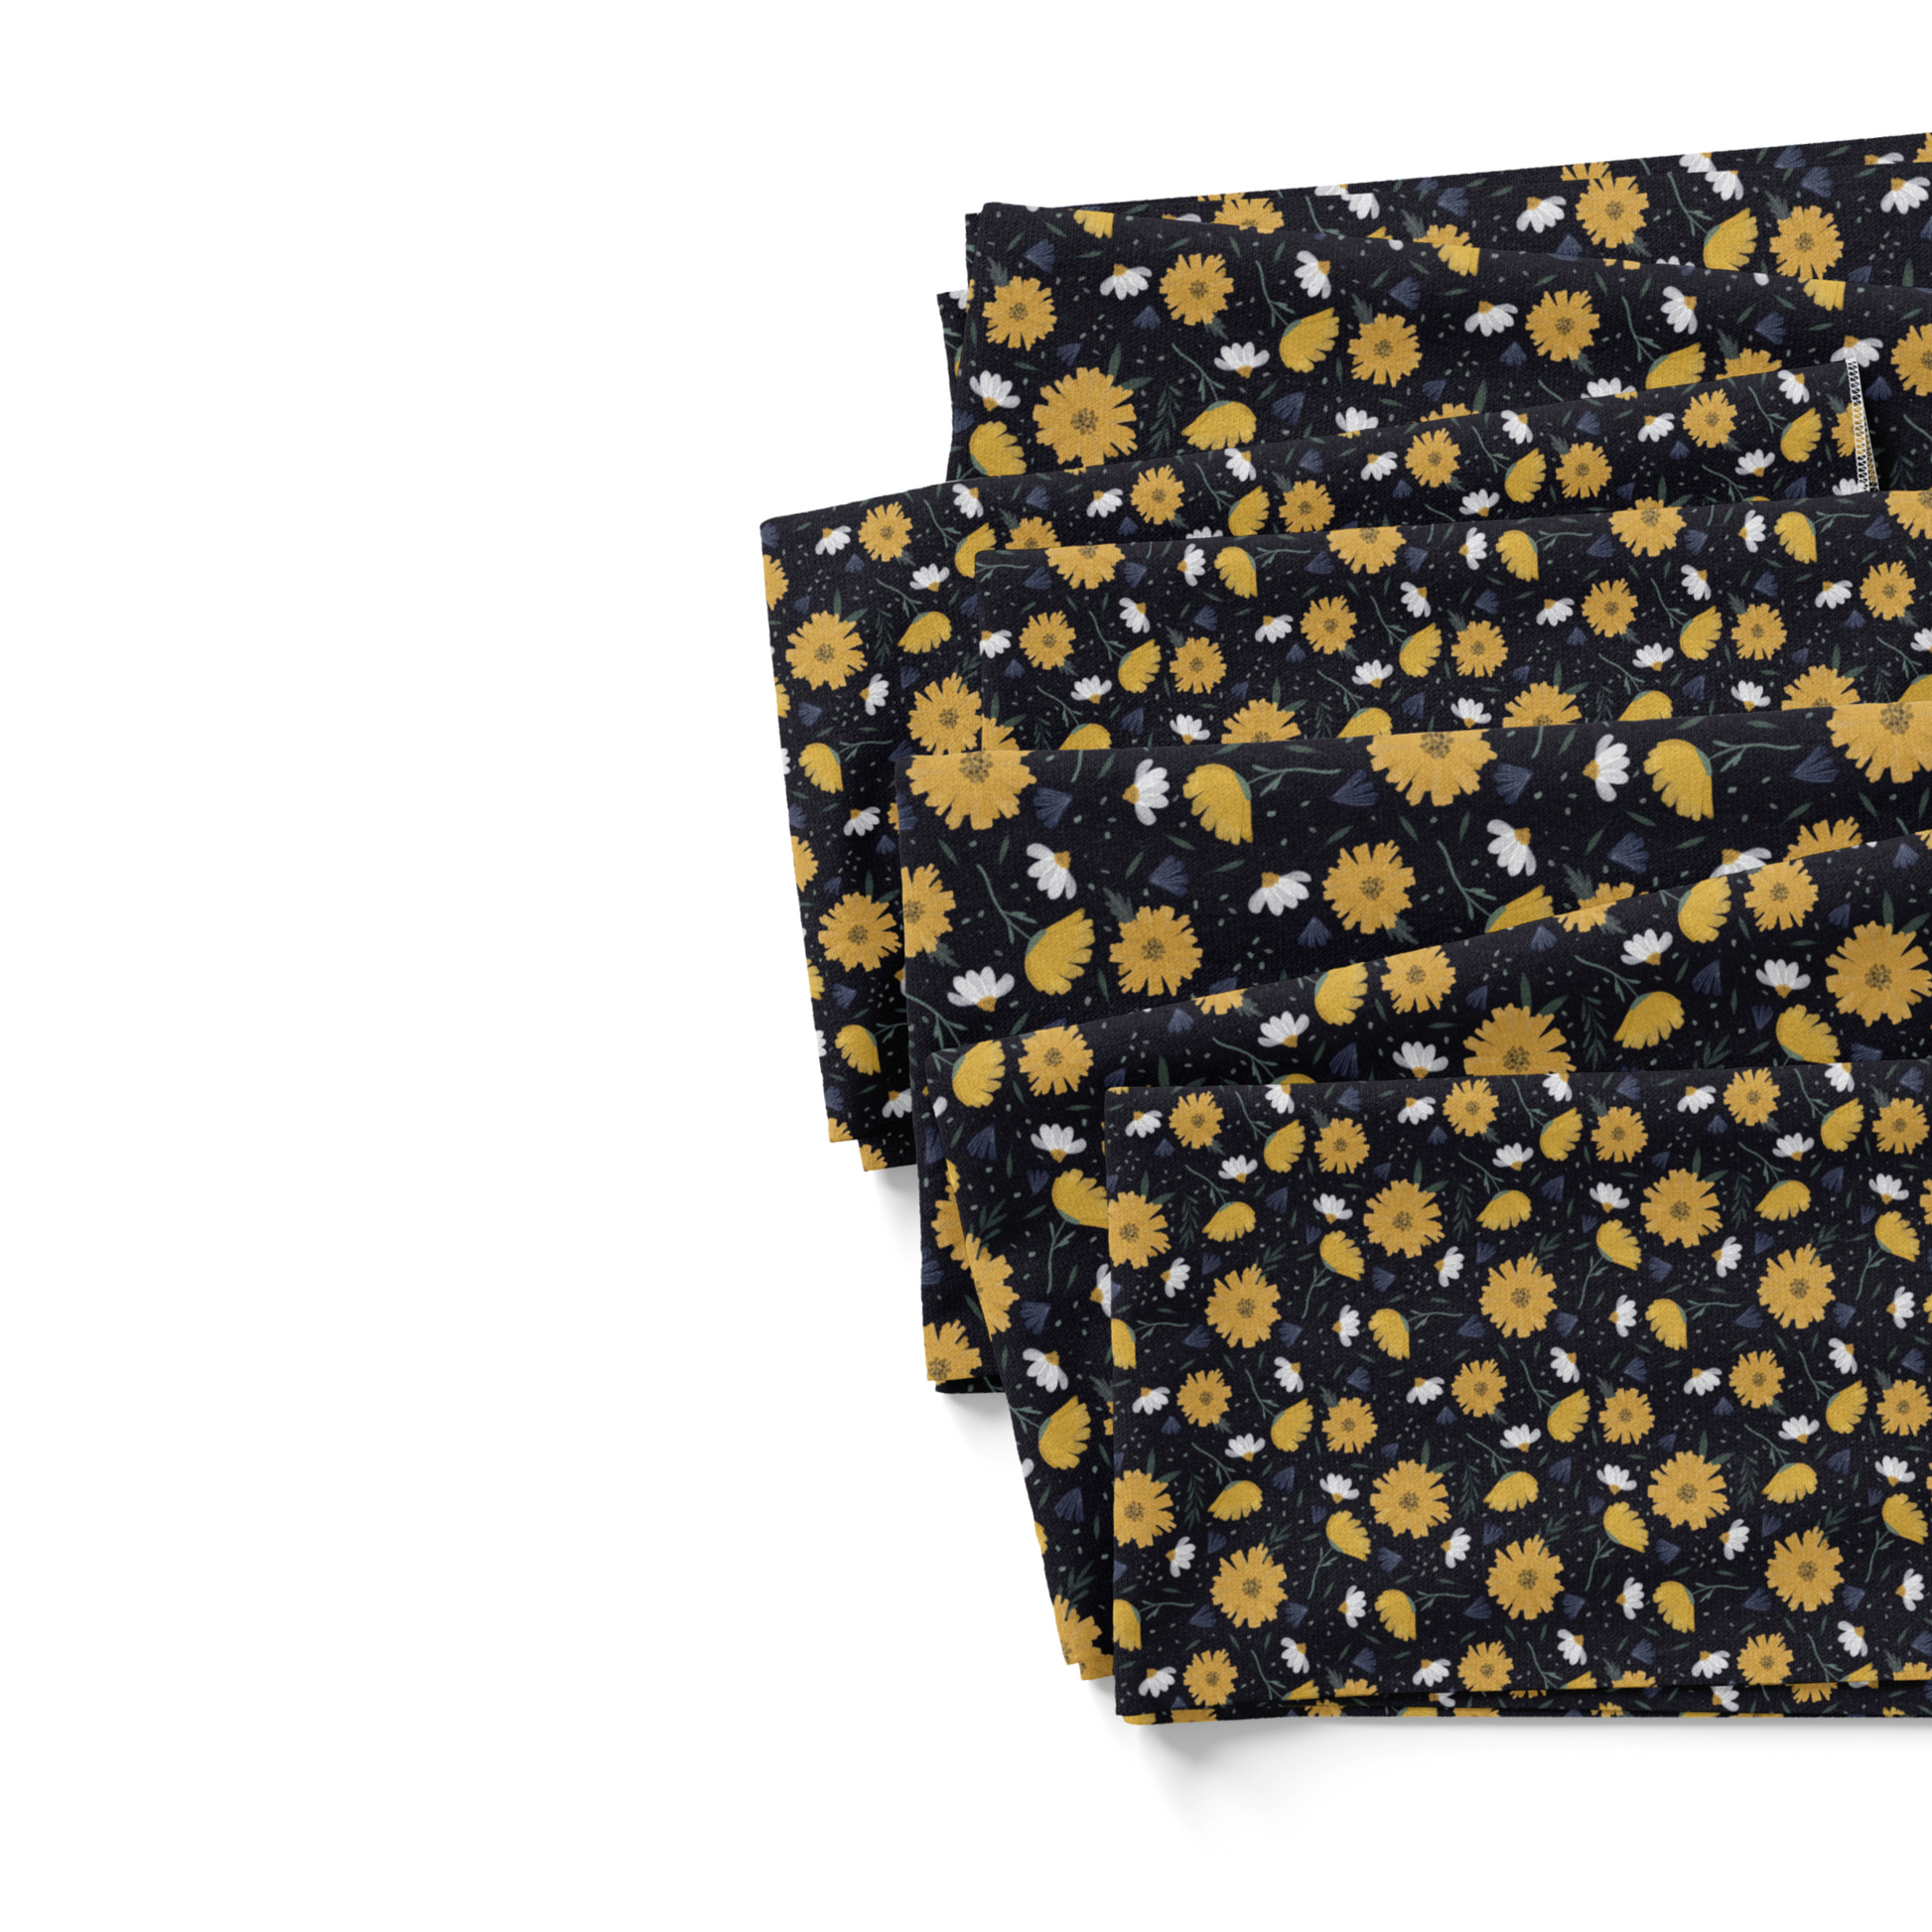 Wall Flower Graphics navy blue fabric swatches with yellow and white florals.